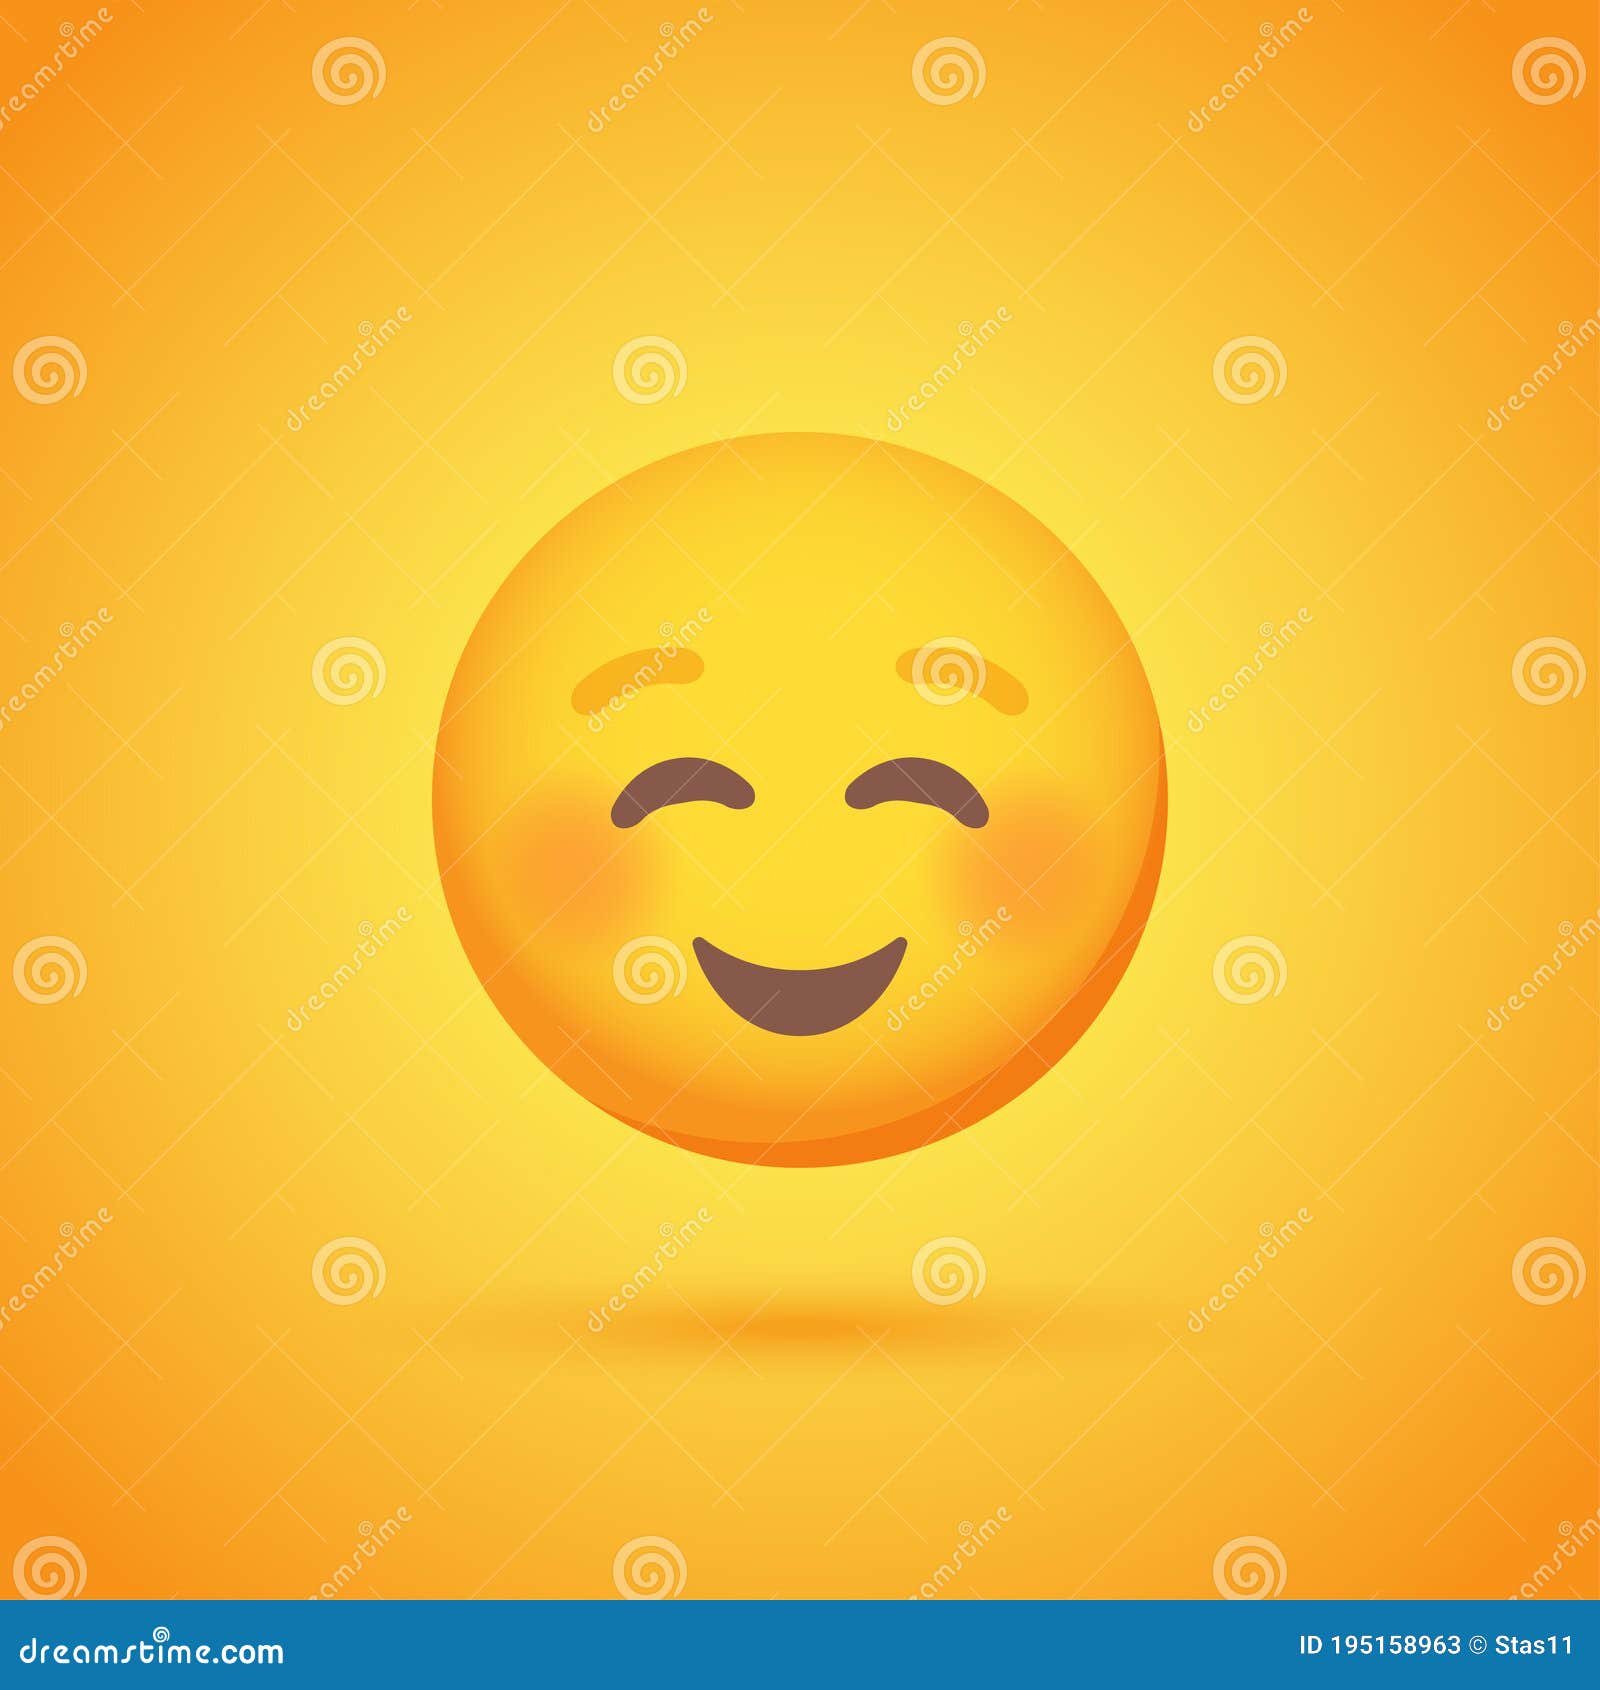 contentment emoticon smile icon with shadow for social network 